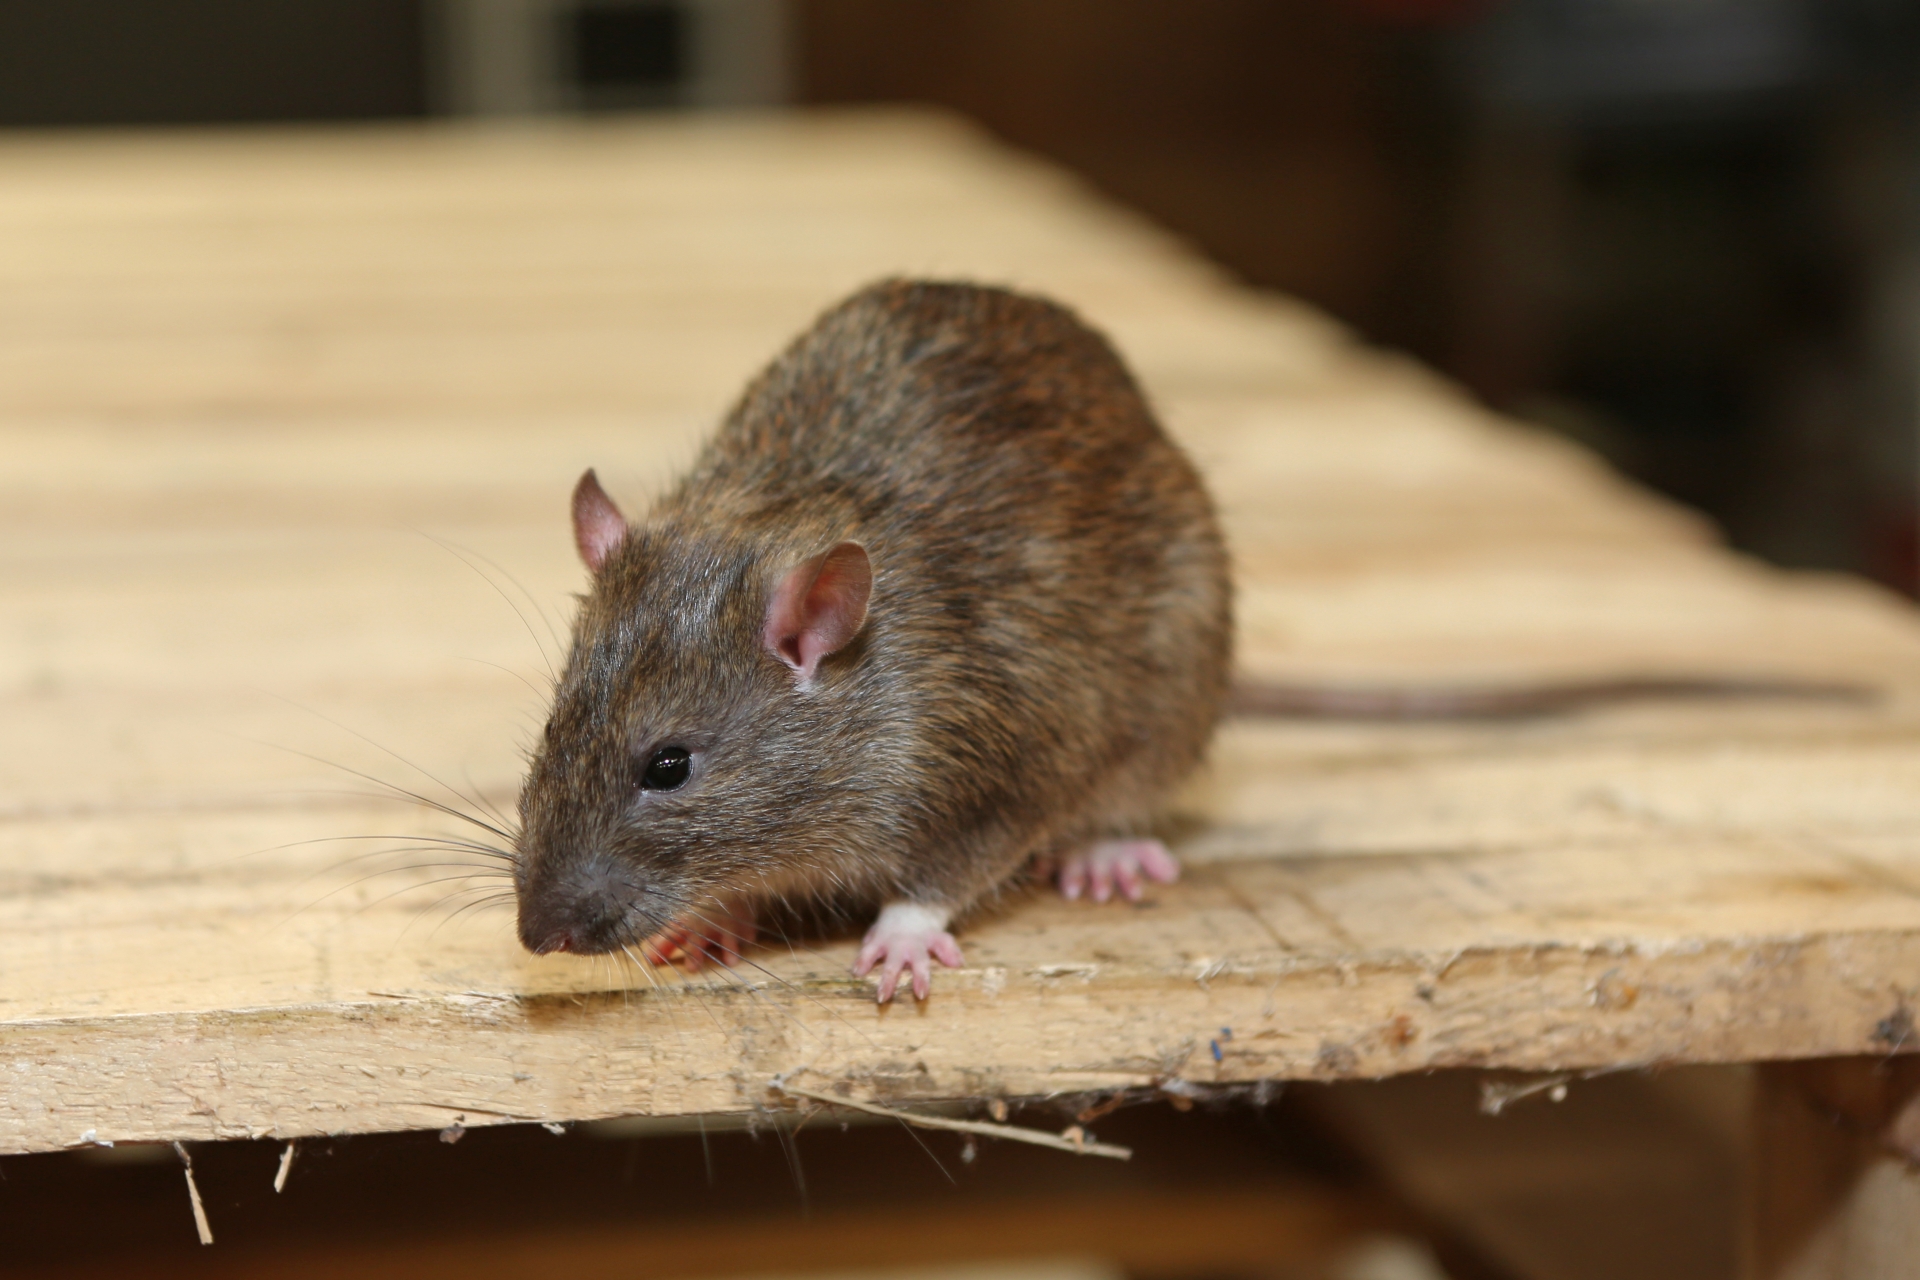 Rat extermination, Pest Control in Greenford, UB6. Call Now 020 8166 9746